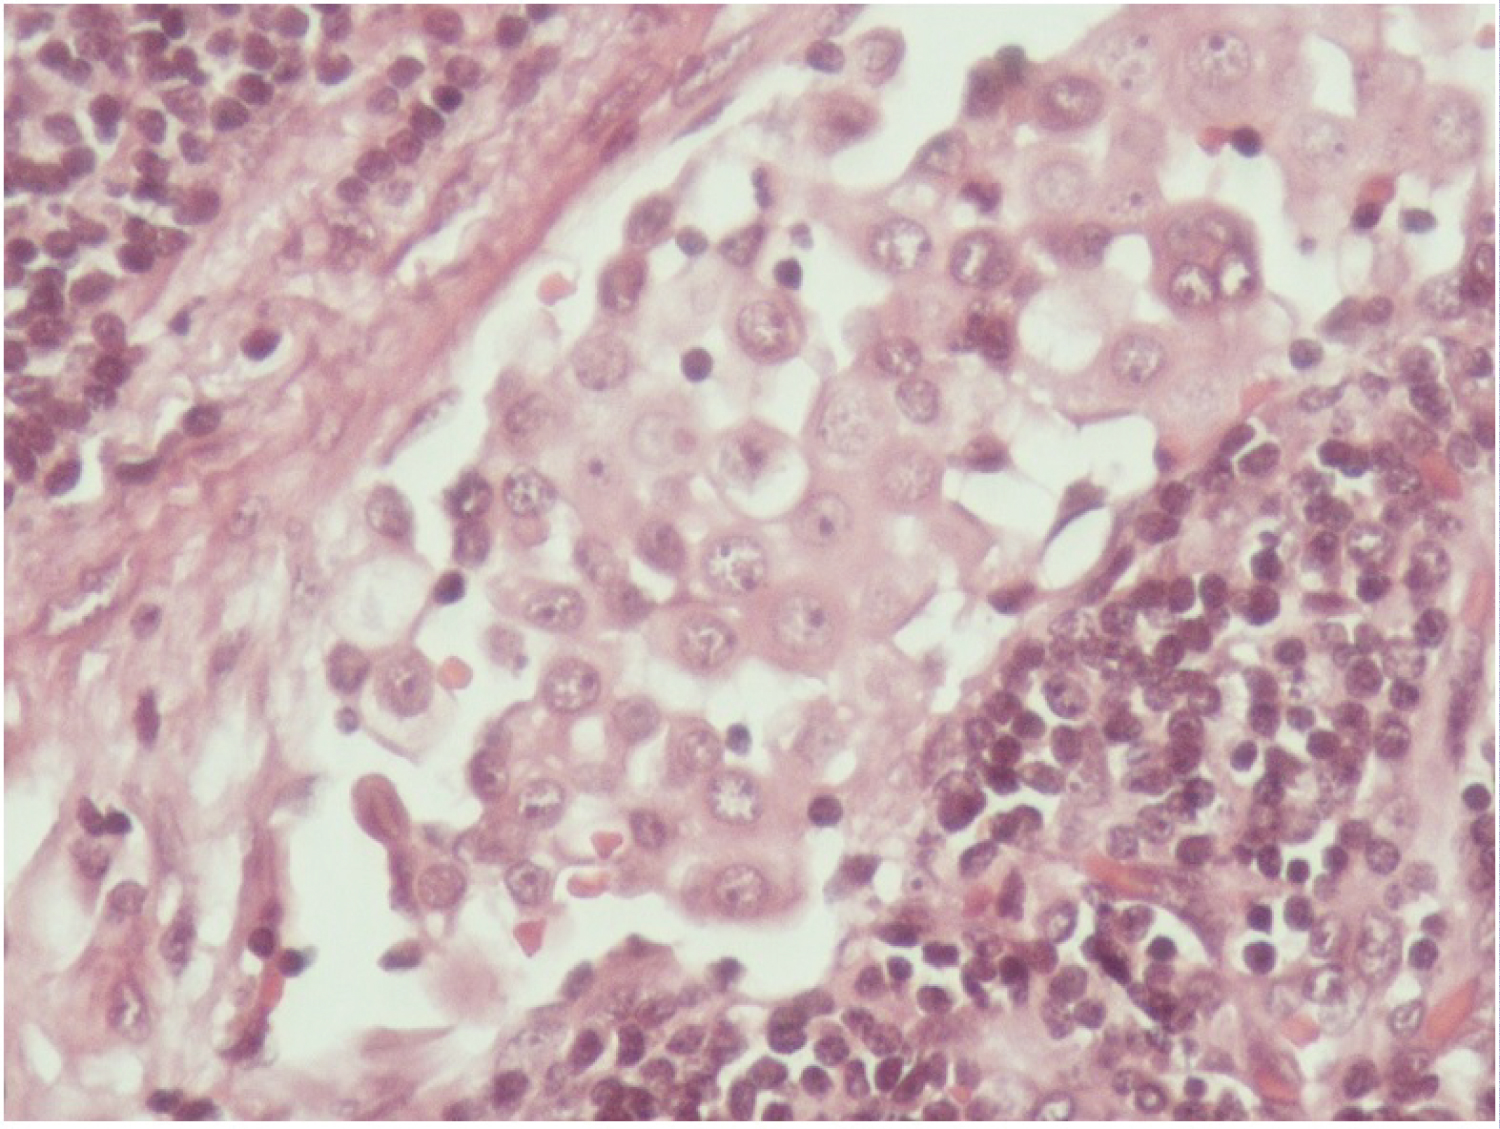 Mesothelial Cells in Lymph Nodes Associated with Massive Pericardial